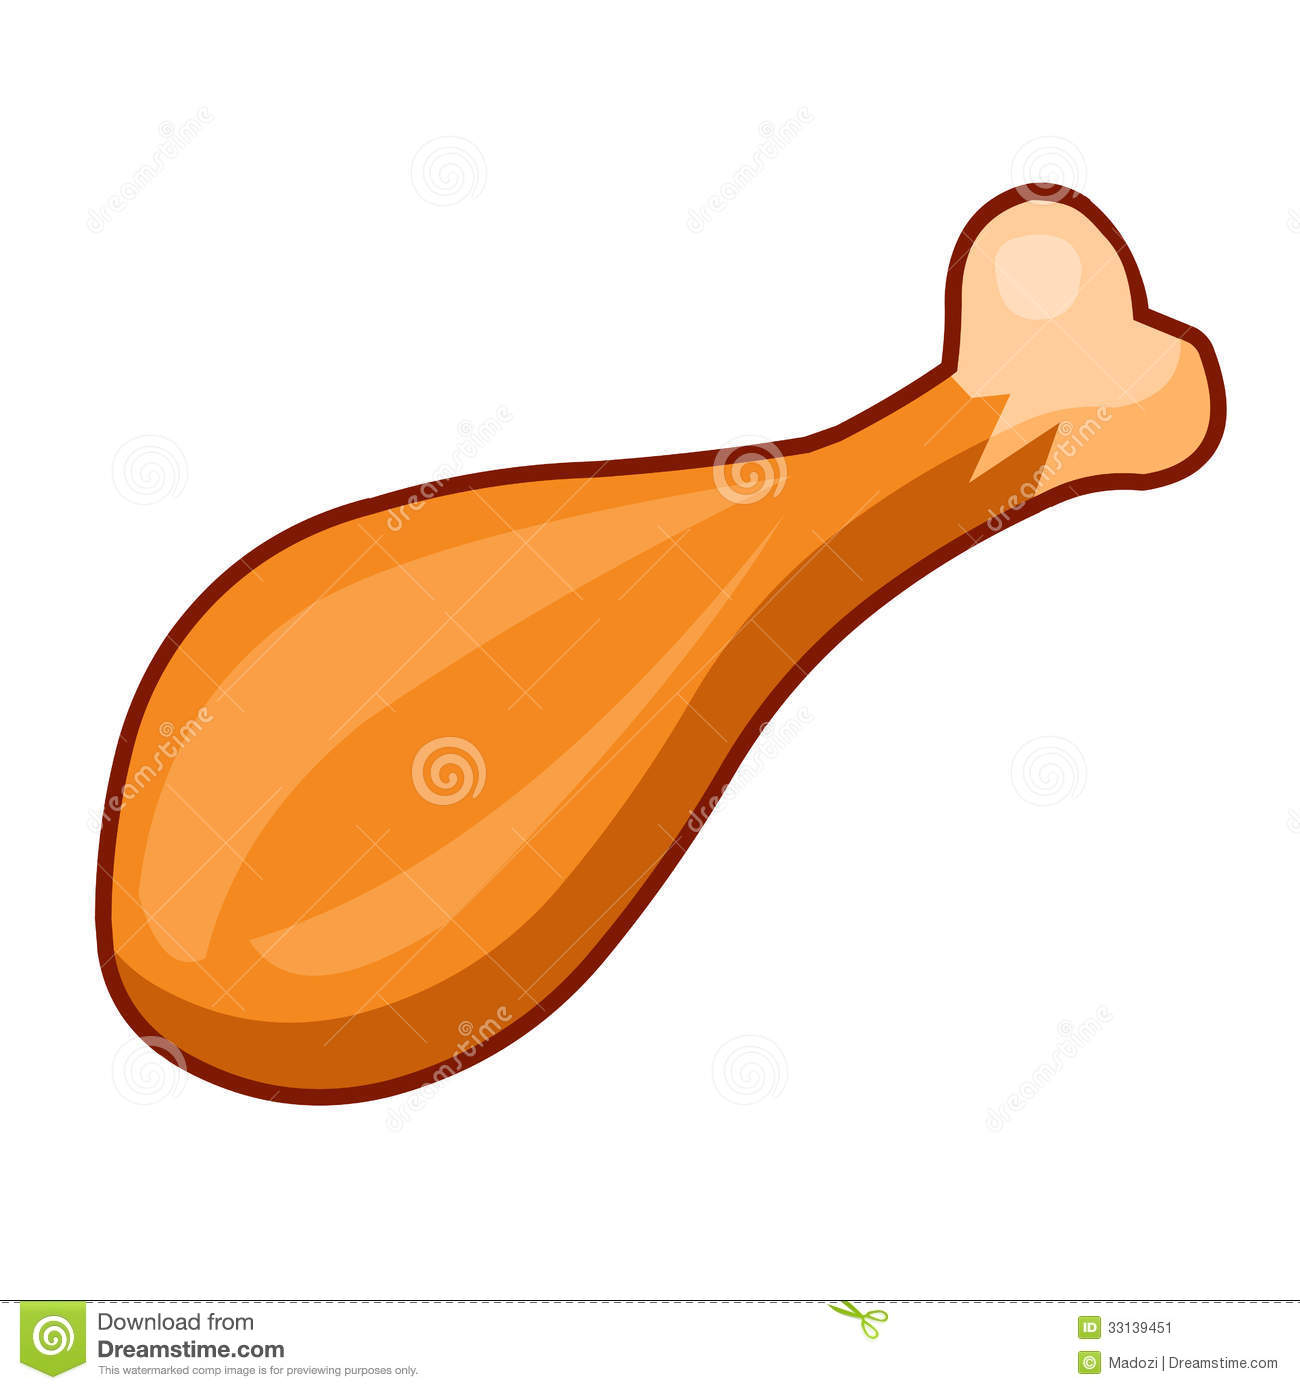 Fried chicken clipart free cl